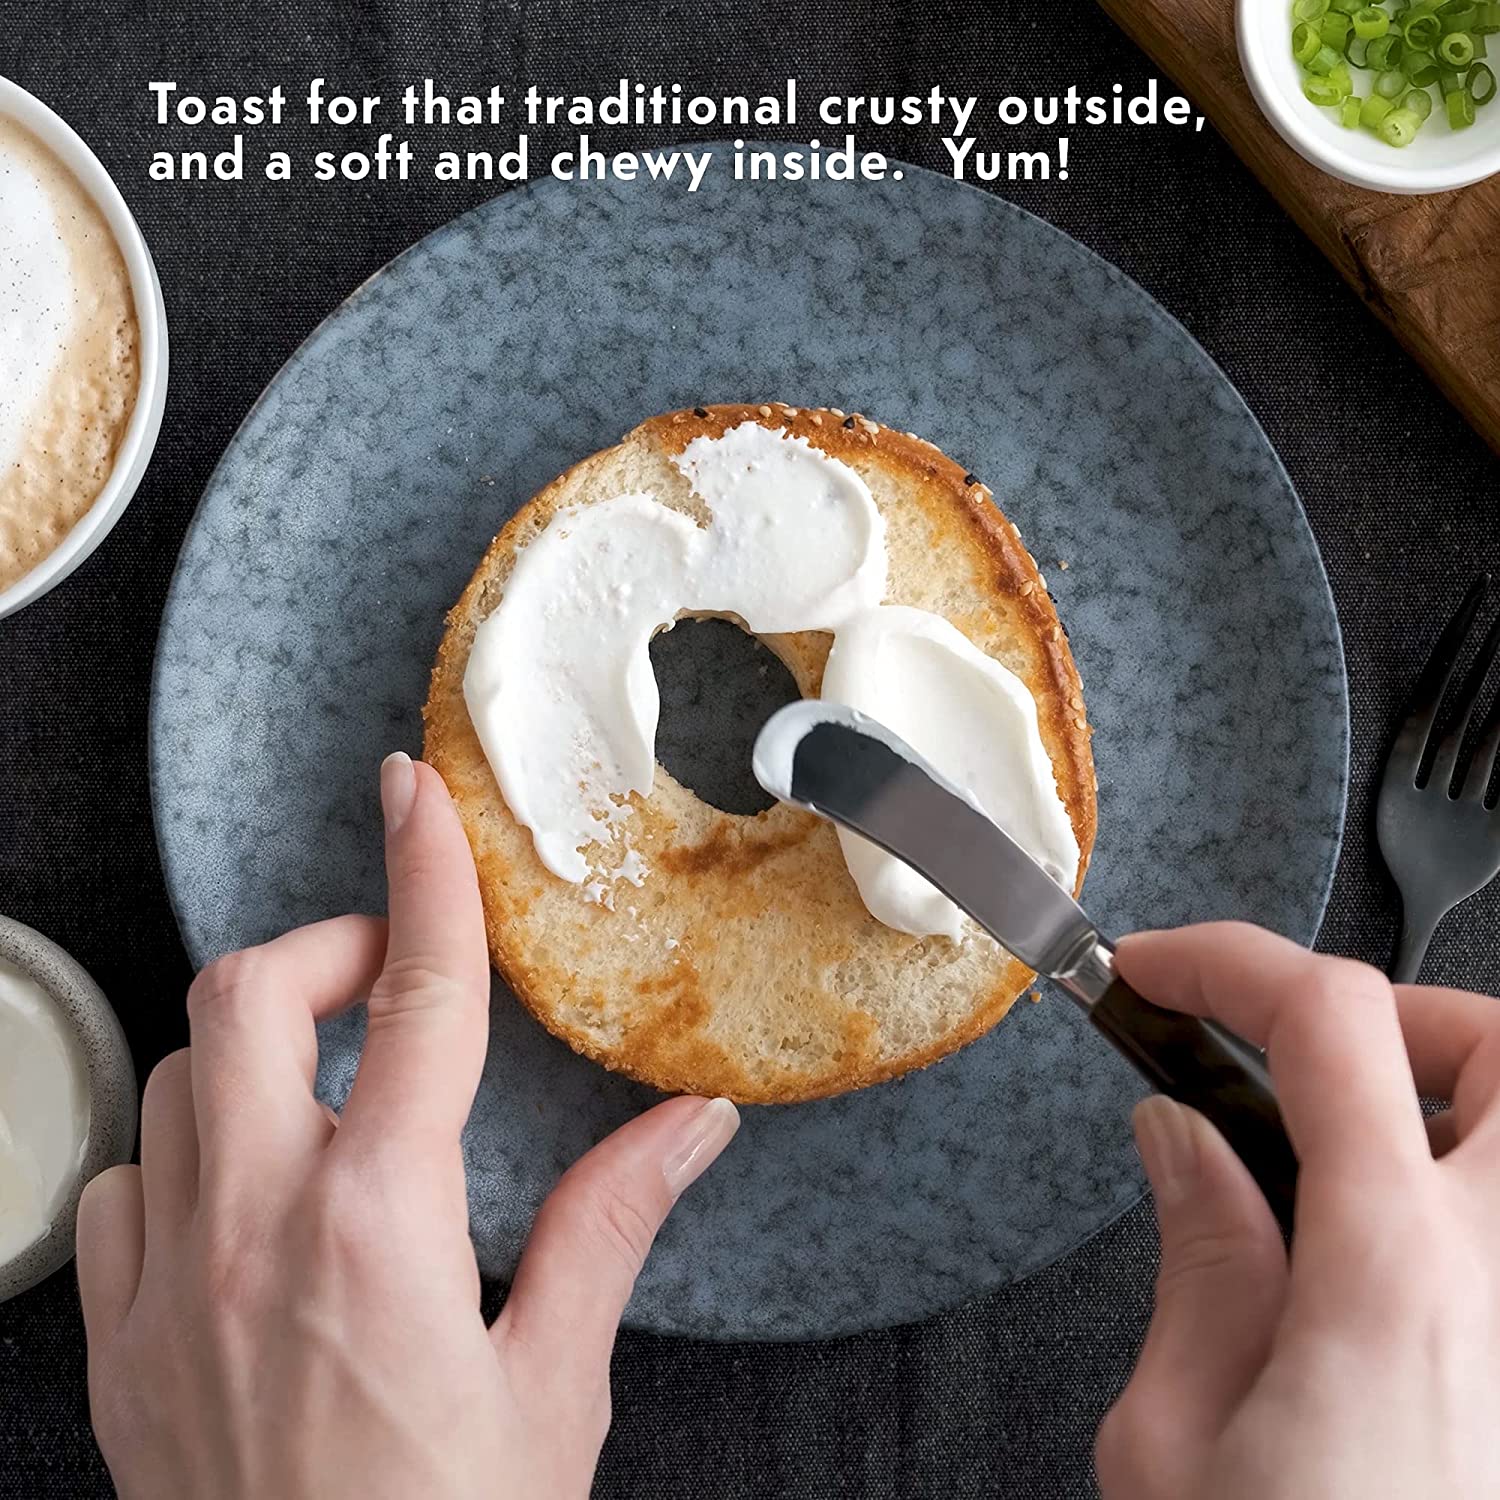 Enjoy your favorite spreads with Toufayan bagels